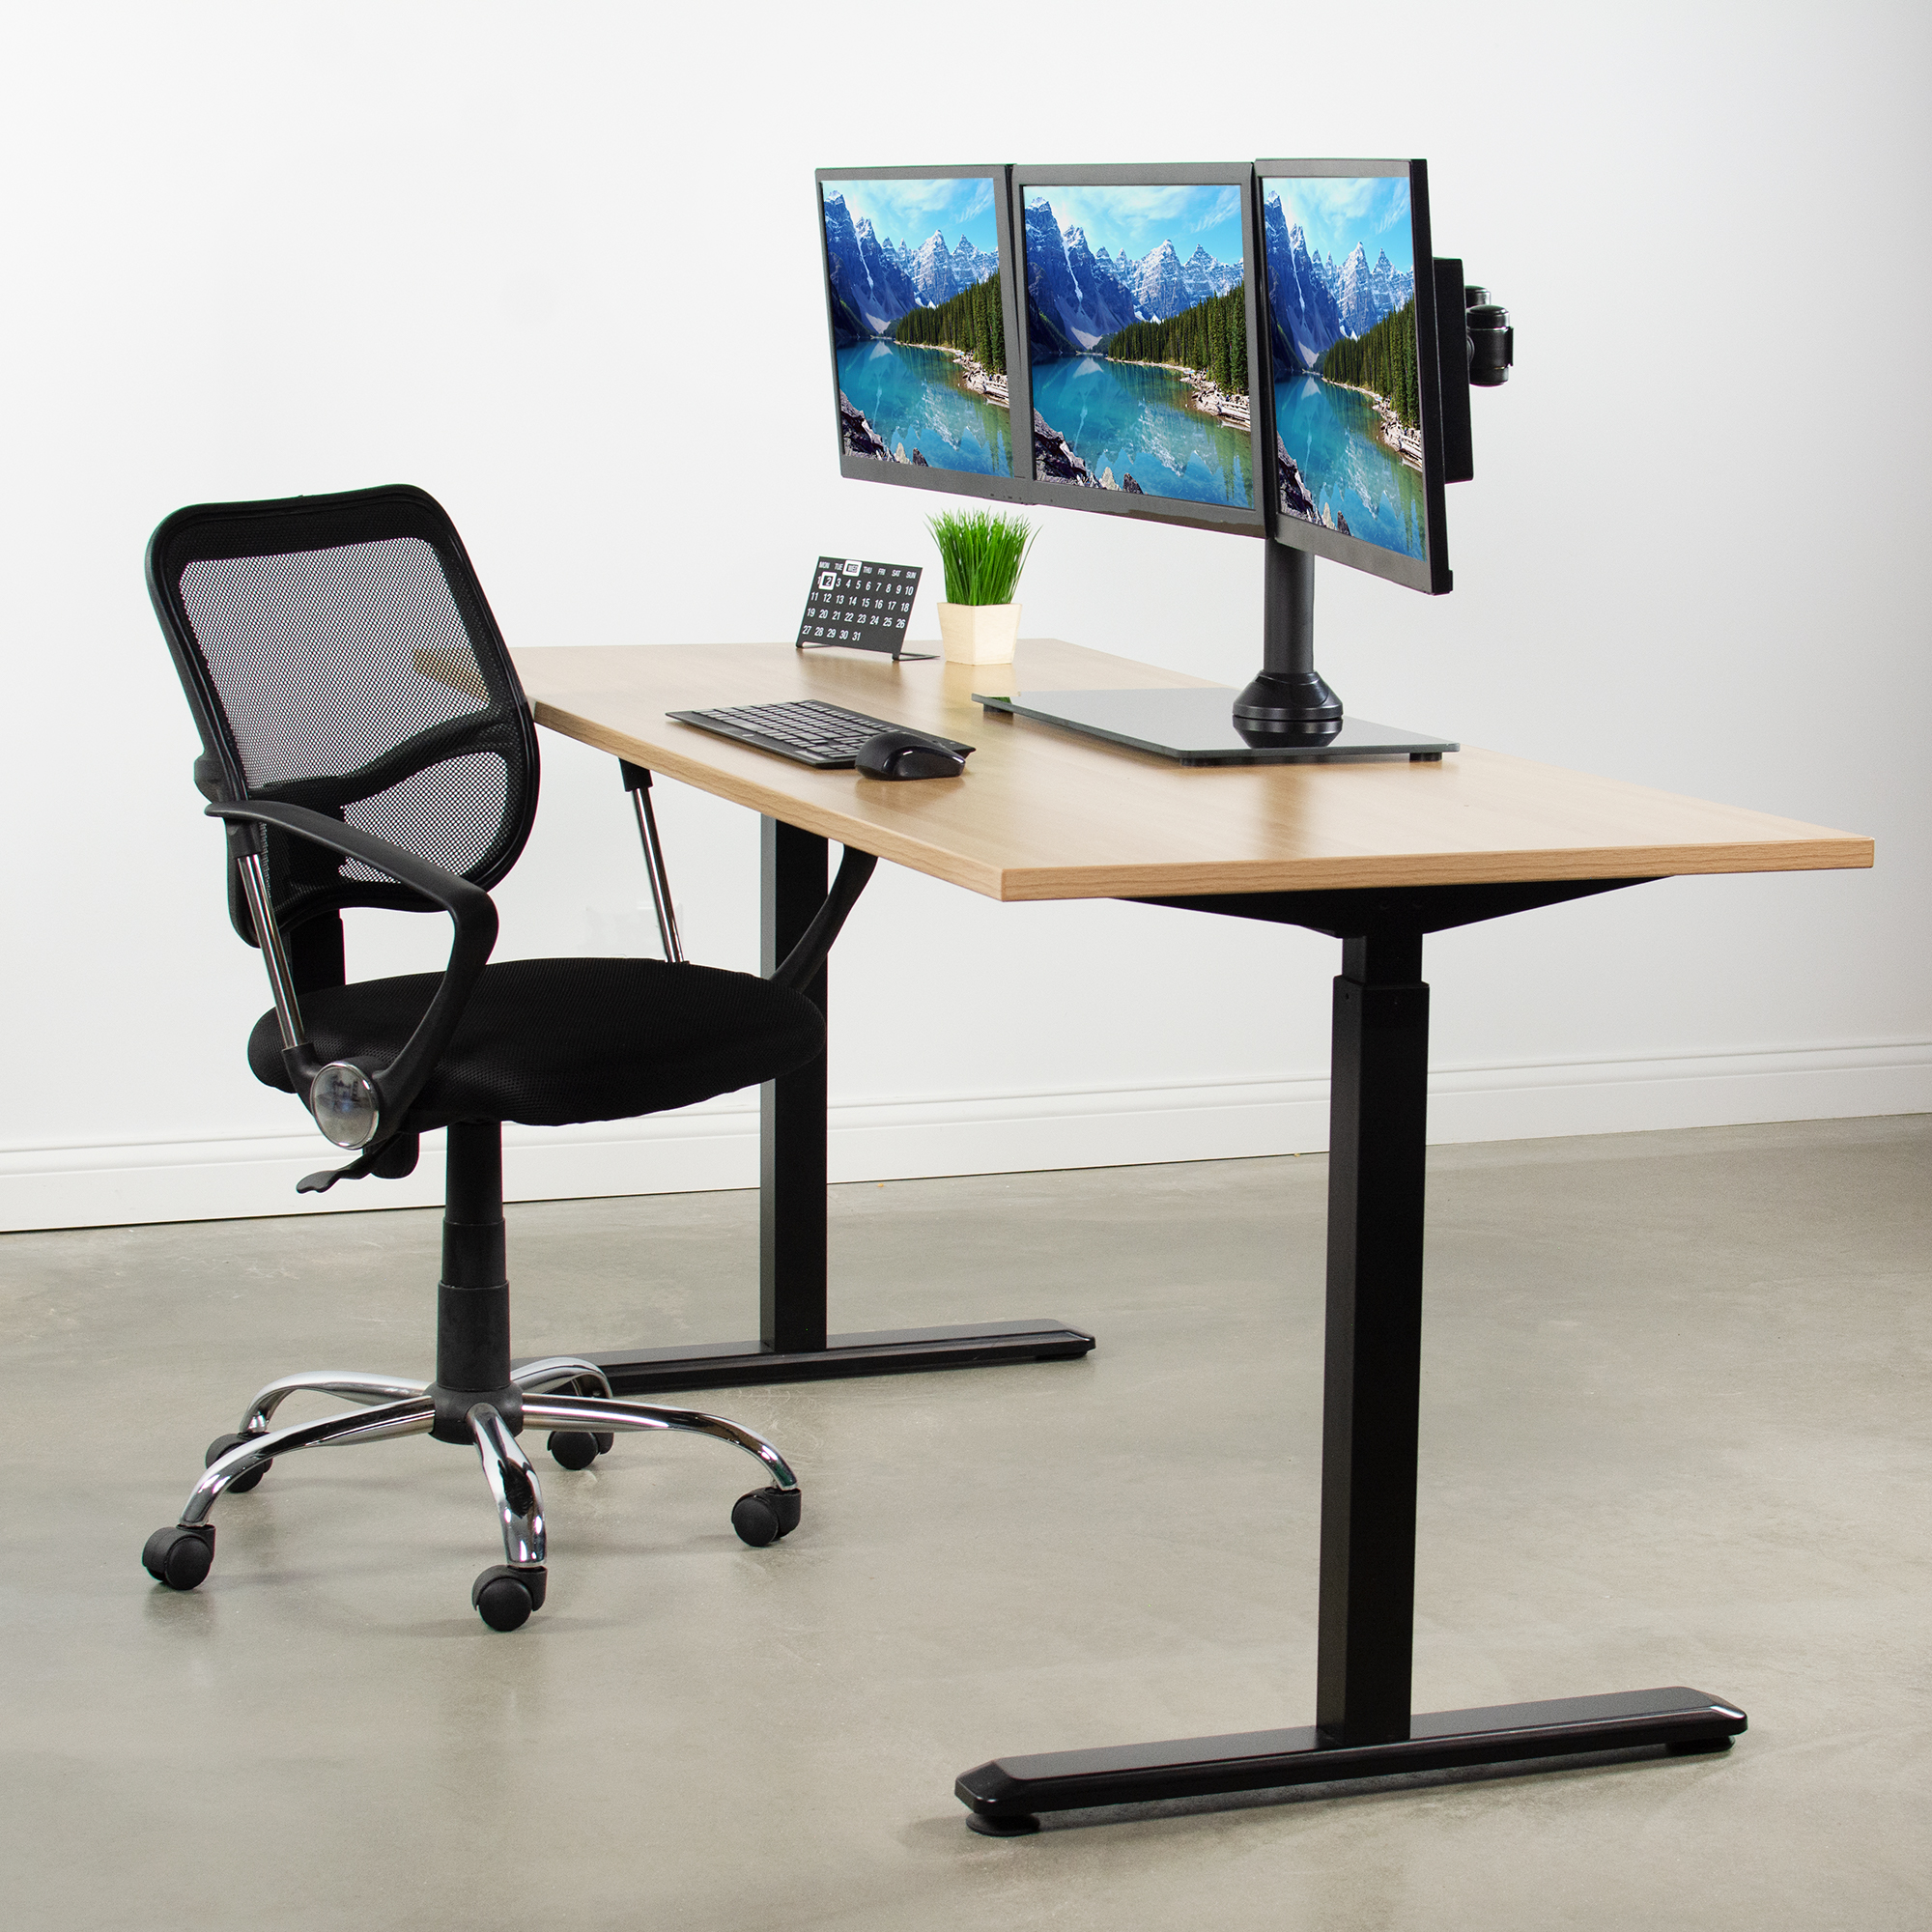 10" to 30" Triple 3 Screens LCD Monitor Desk Mount Stand /w Articulating Arms 